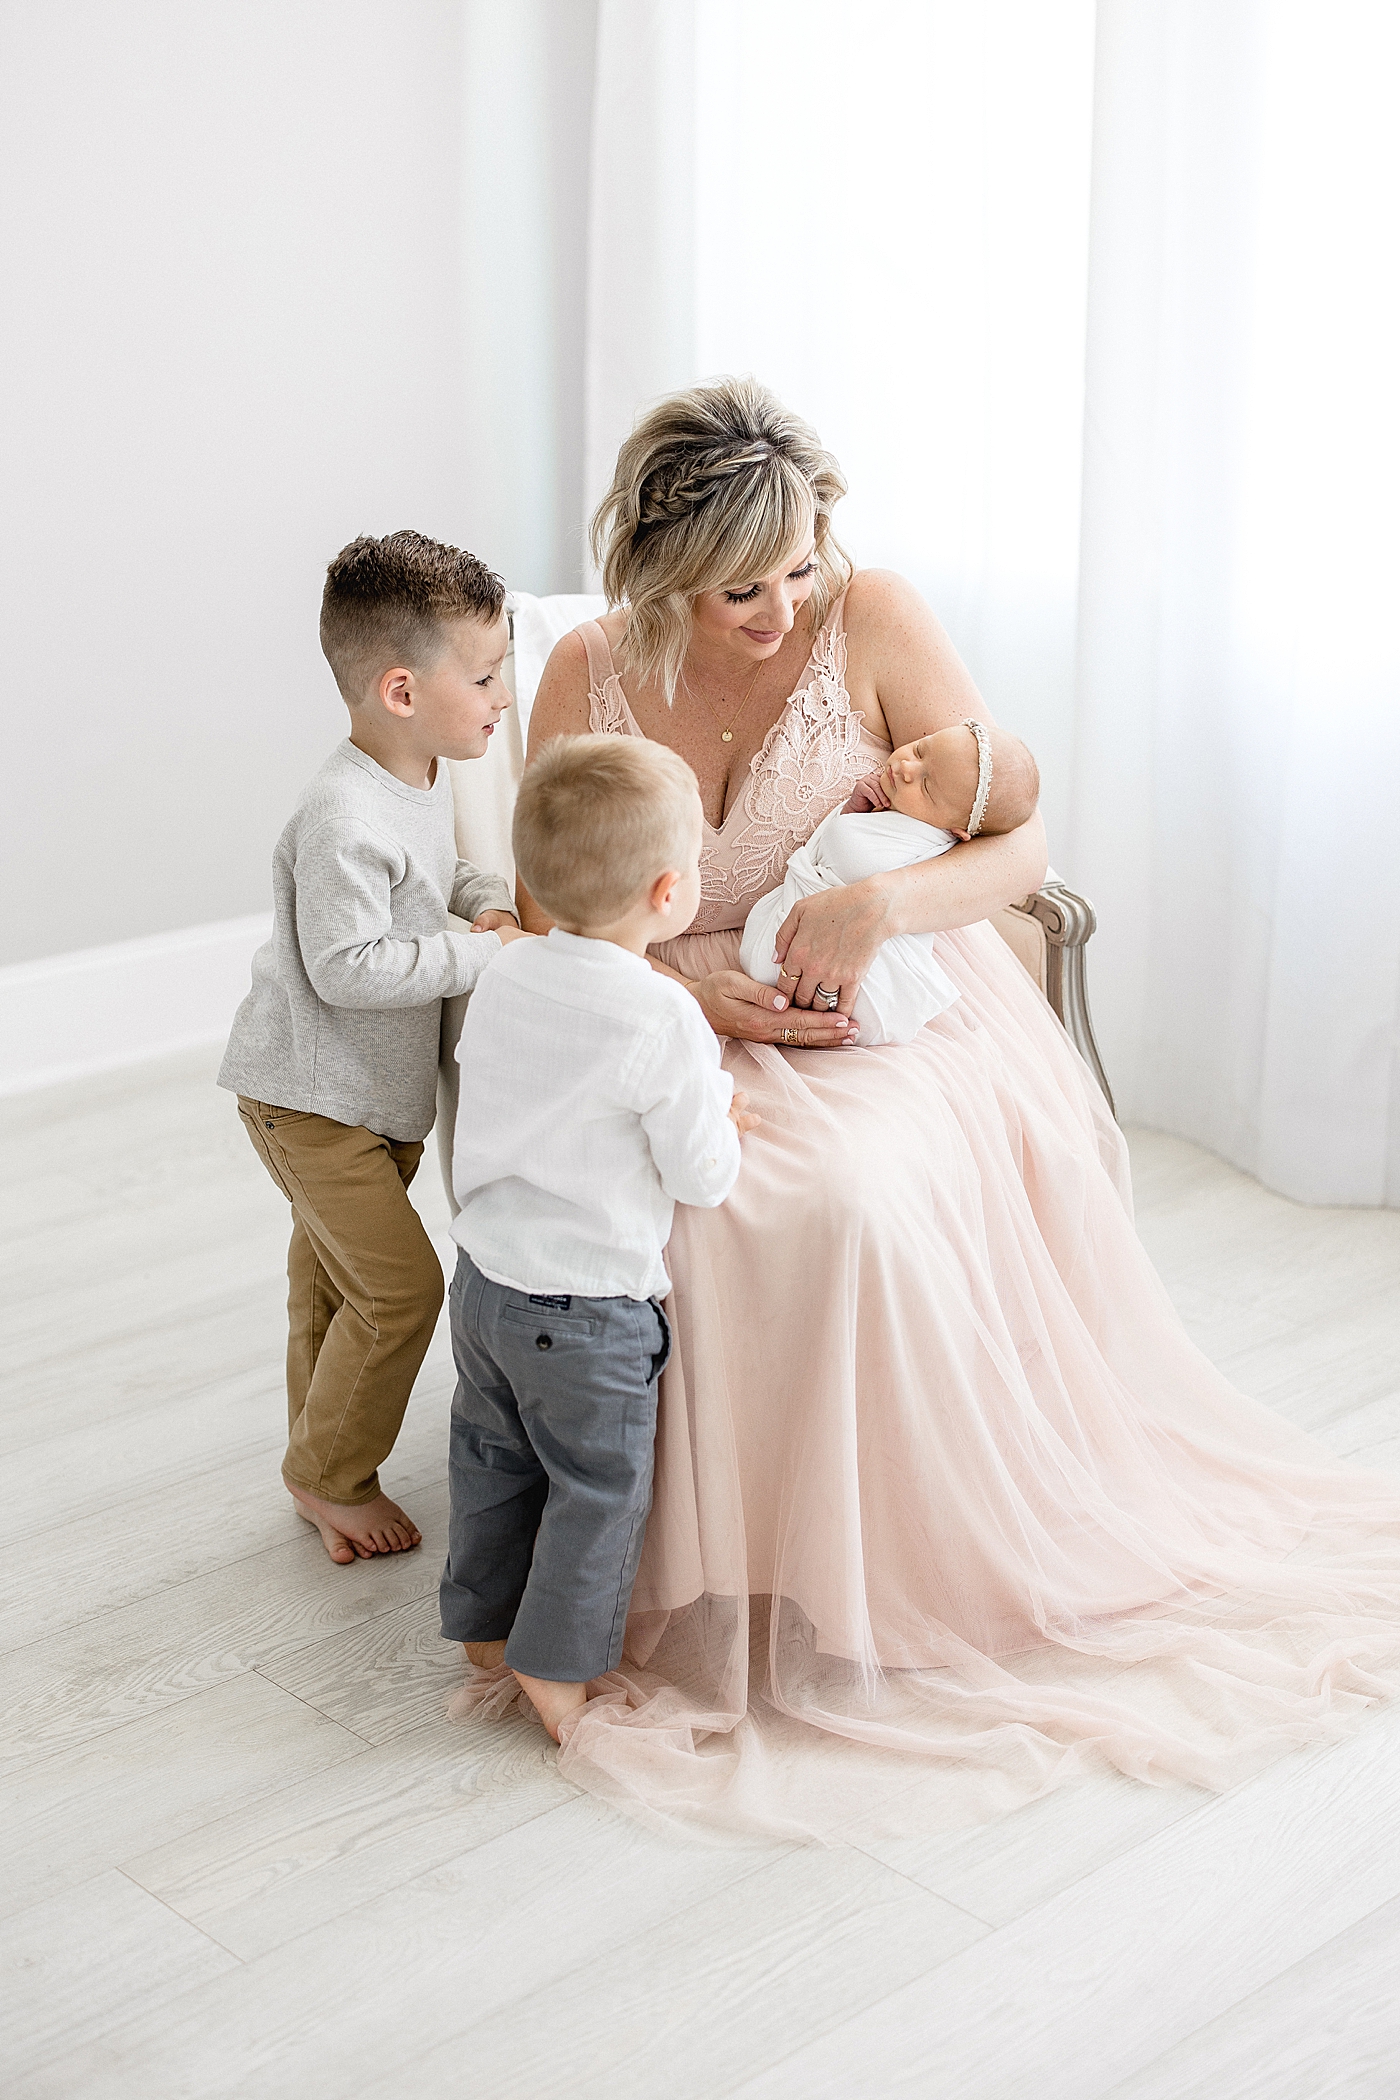 Mom sitting in chair with baby and big brothers are looking at her. Photo by Brittany Elise Photography.